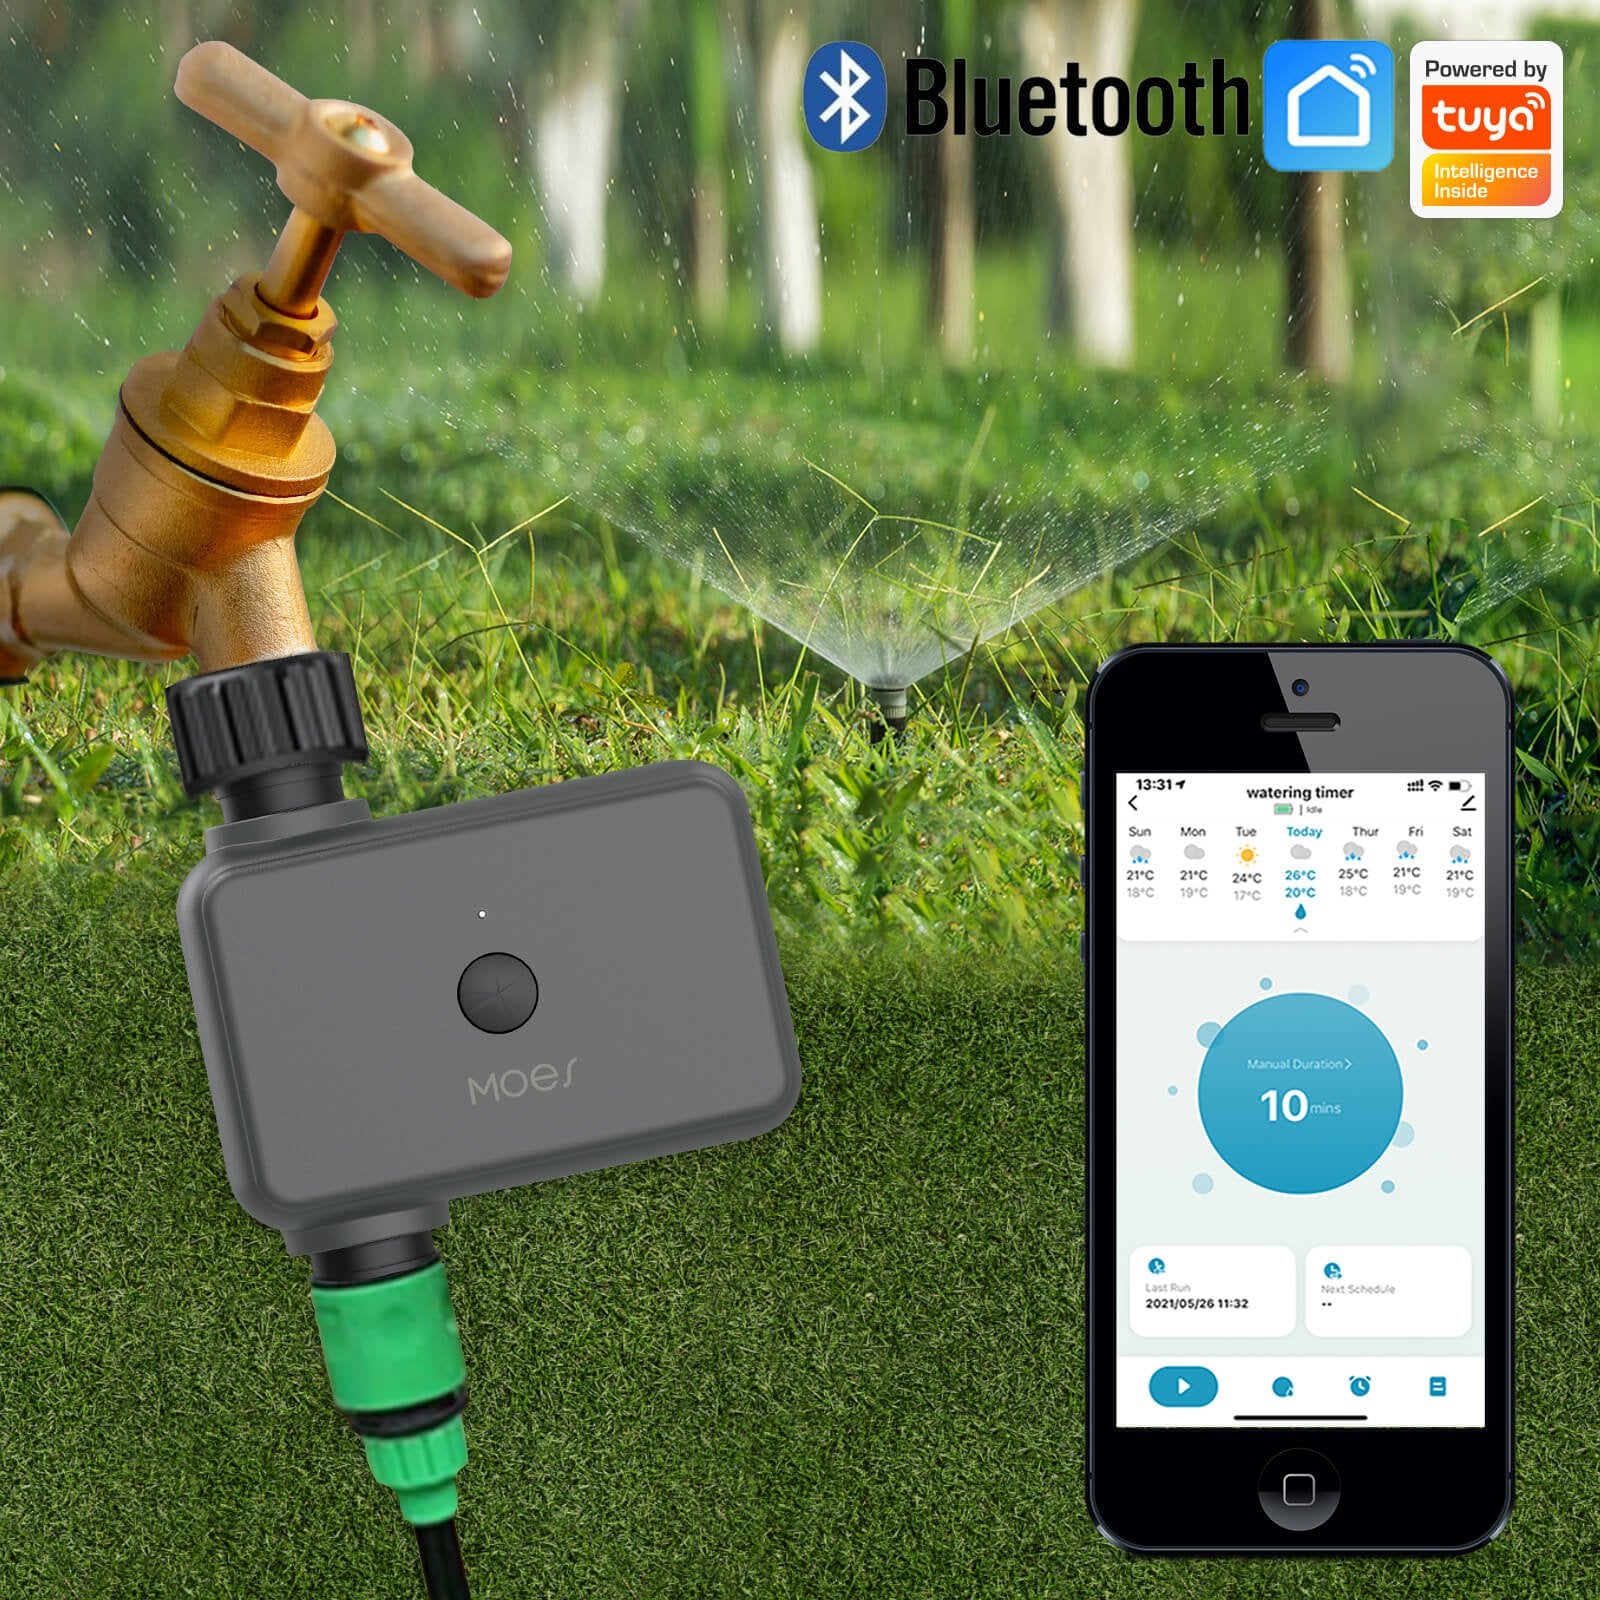 Smart Water Timer with Wi-Fi Weather Station Hub for Garden